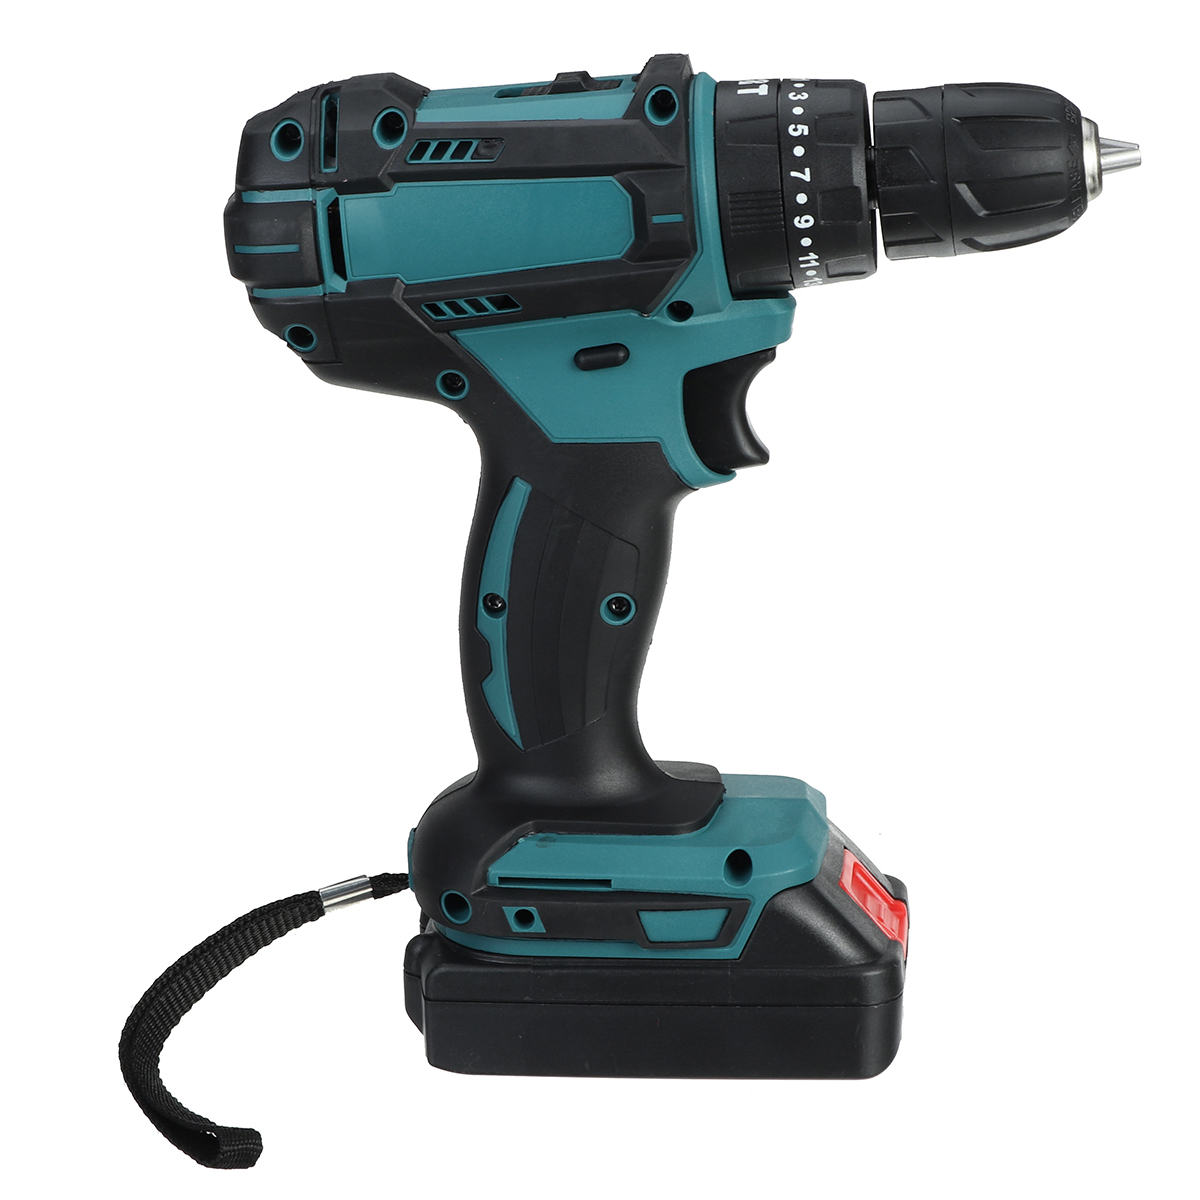 18V-Electric-Drill-Rechargeable-Screwdriver-Flat-Drill-Impact-Wrench-w-None-or-1pc-or-2pcs-Battery-1798111-12